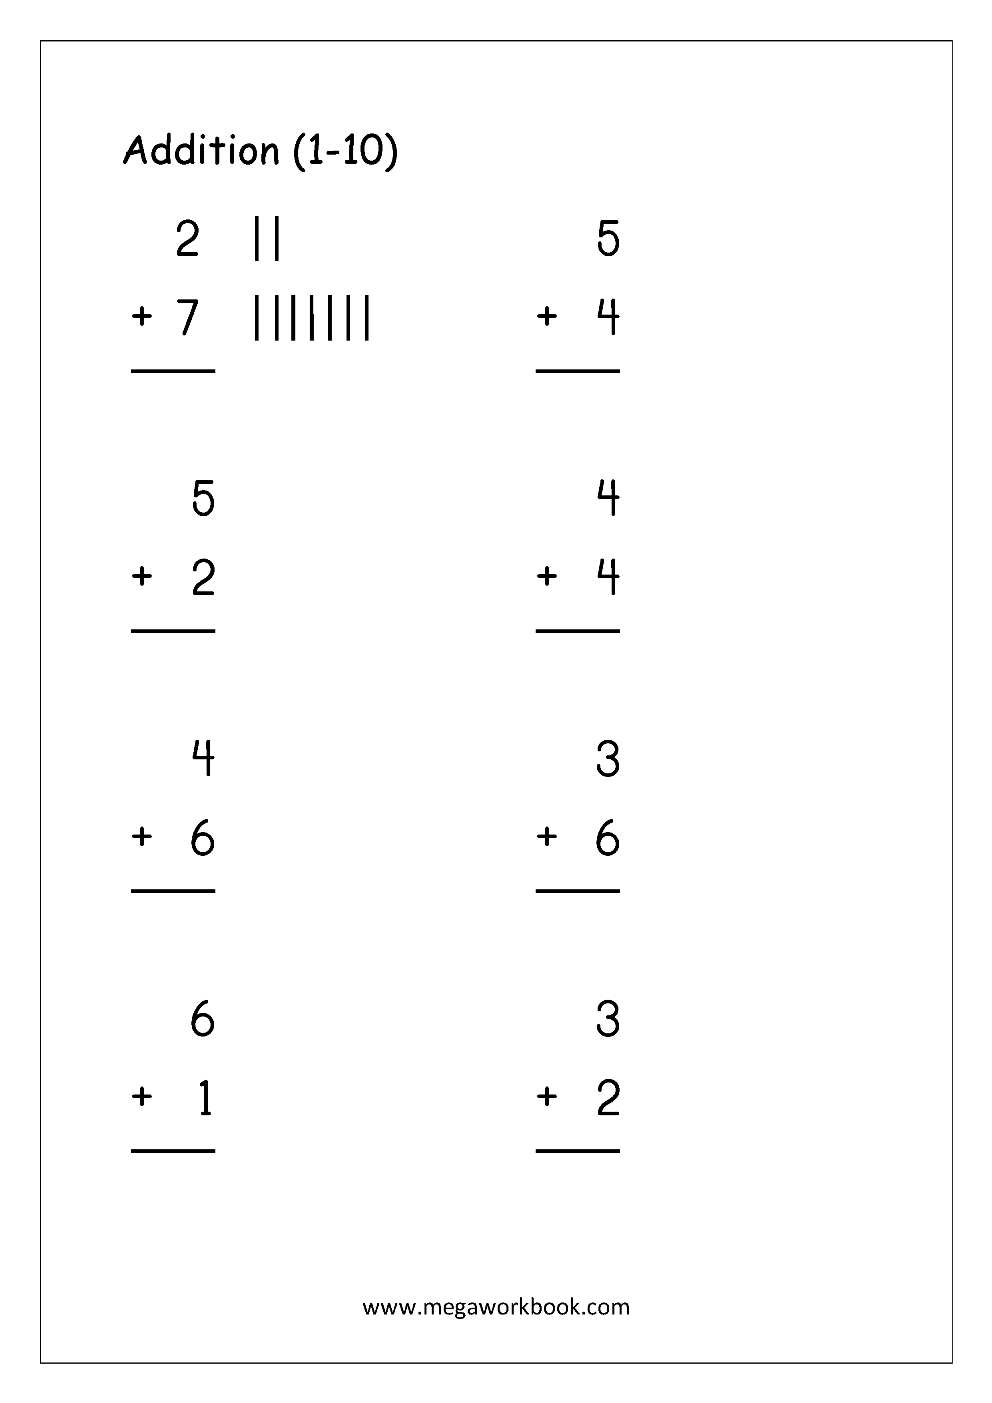 Free Printable Number Addition Worksheets 1 10 For Kindergarten And Grade 1 Addition On Number Line Addition With Pictures Objects Megaworkbook